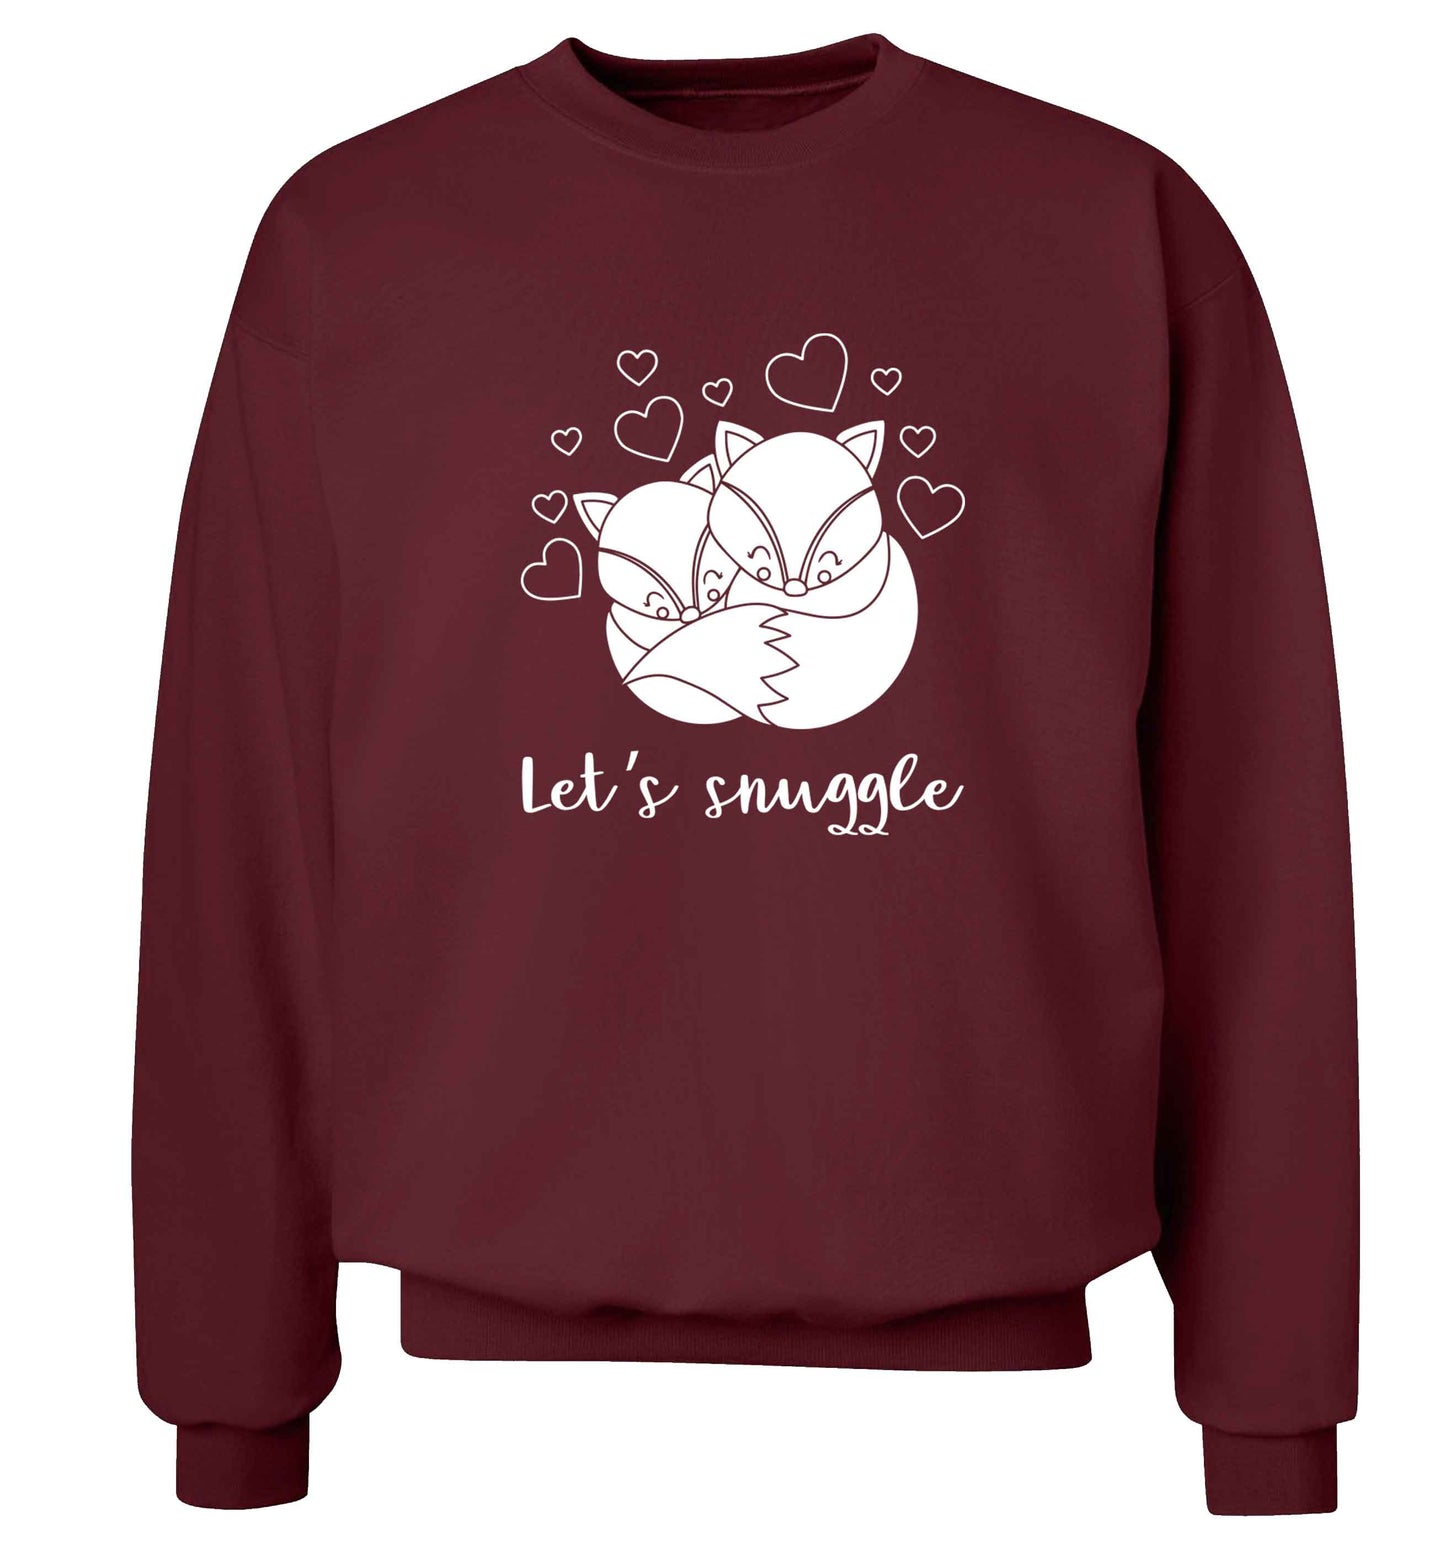 Let's snuggle adult's unisex maroon sweater 2XL